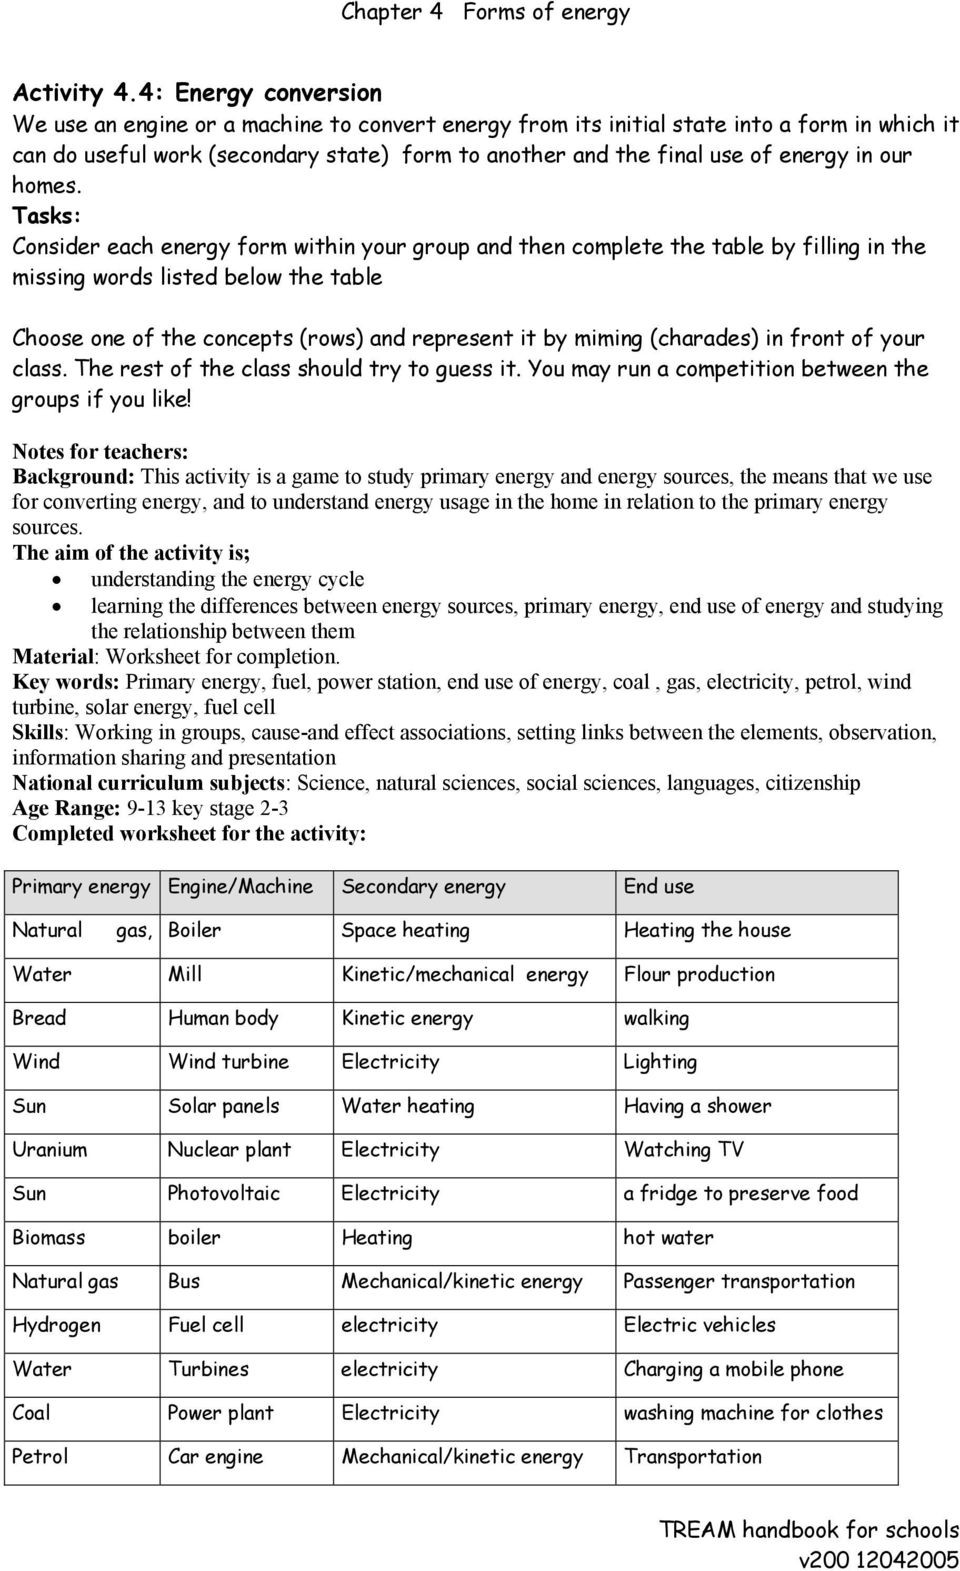 Energy Transformation Worksheet Pdf Chapter 4 forms Of Energy Pdf Free Download